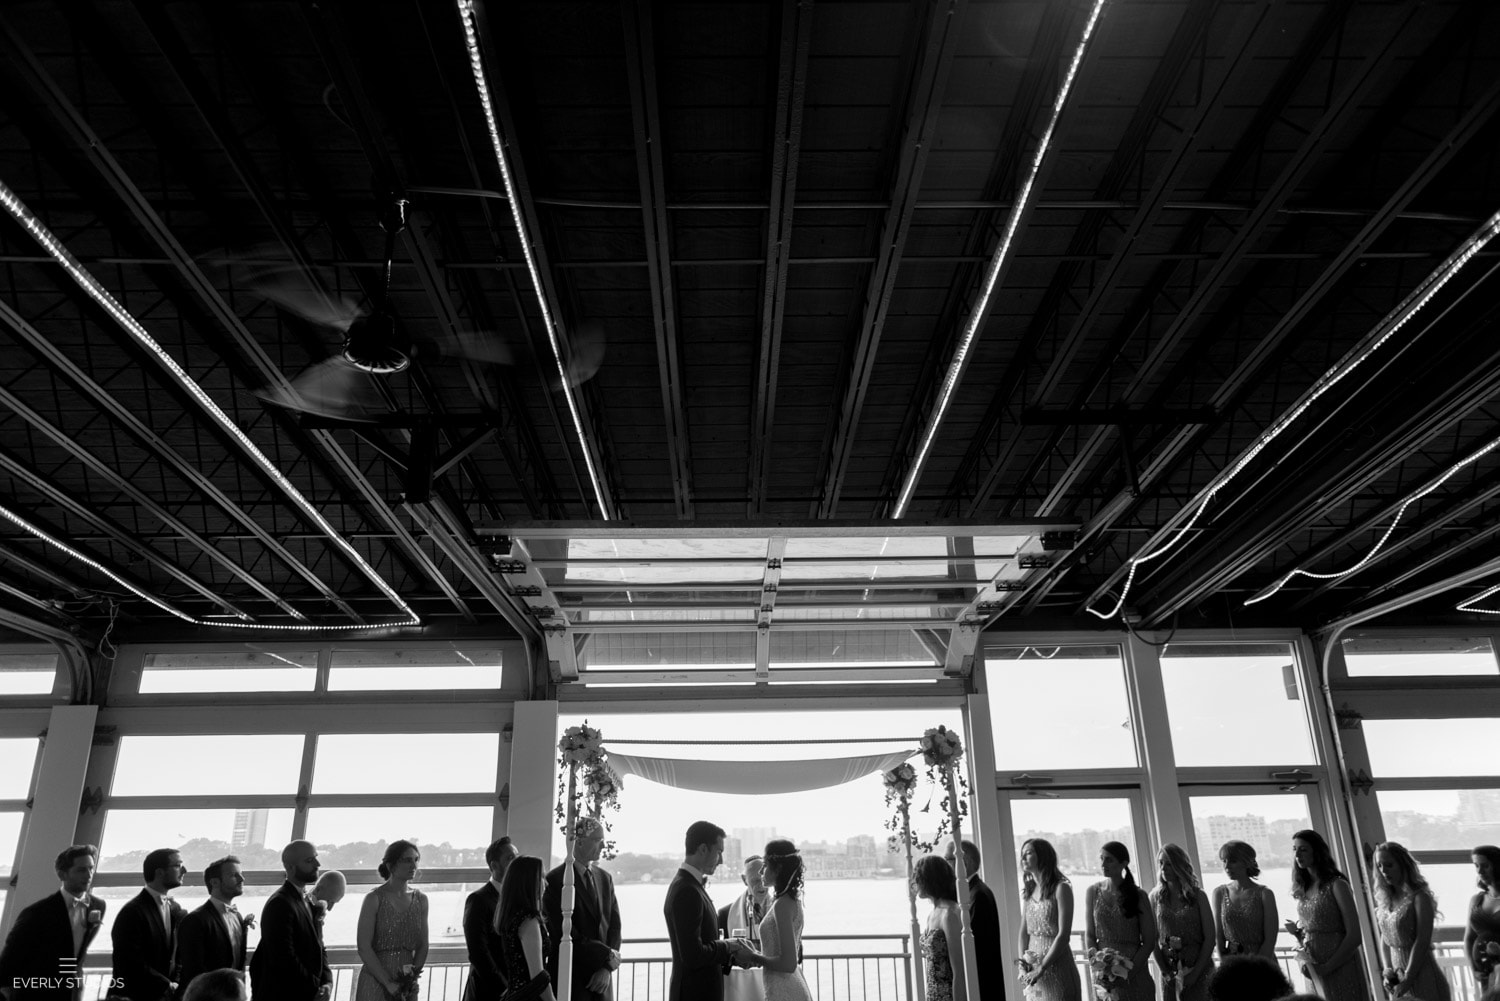 Chelsea Piers Sunset Terrace wedding in NYC